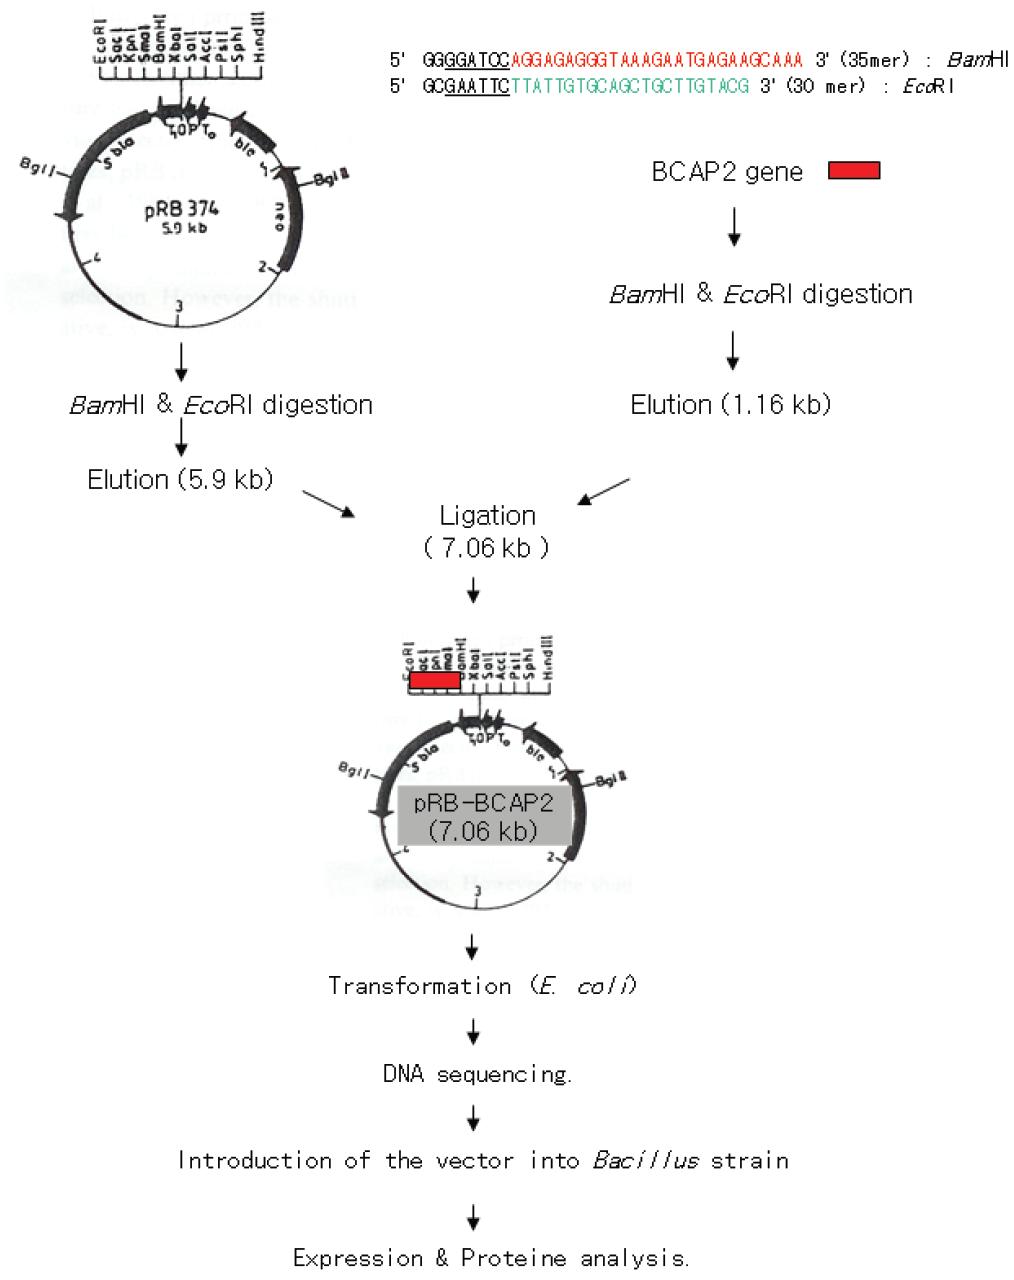 Cloning Strategy of the BCAP2 gene into lvector, pRB374.